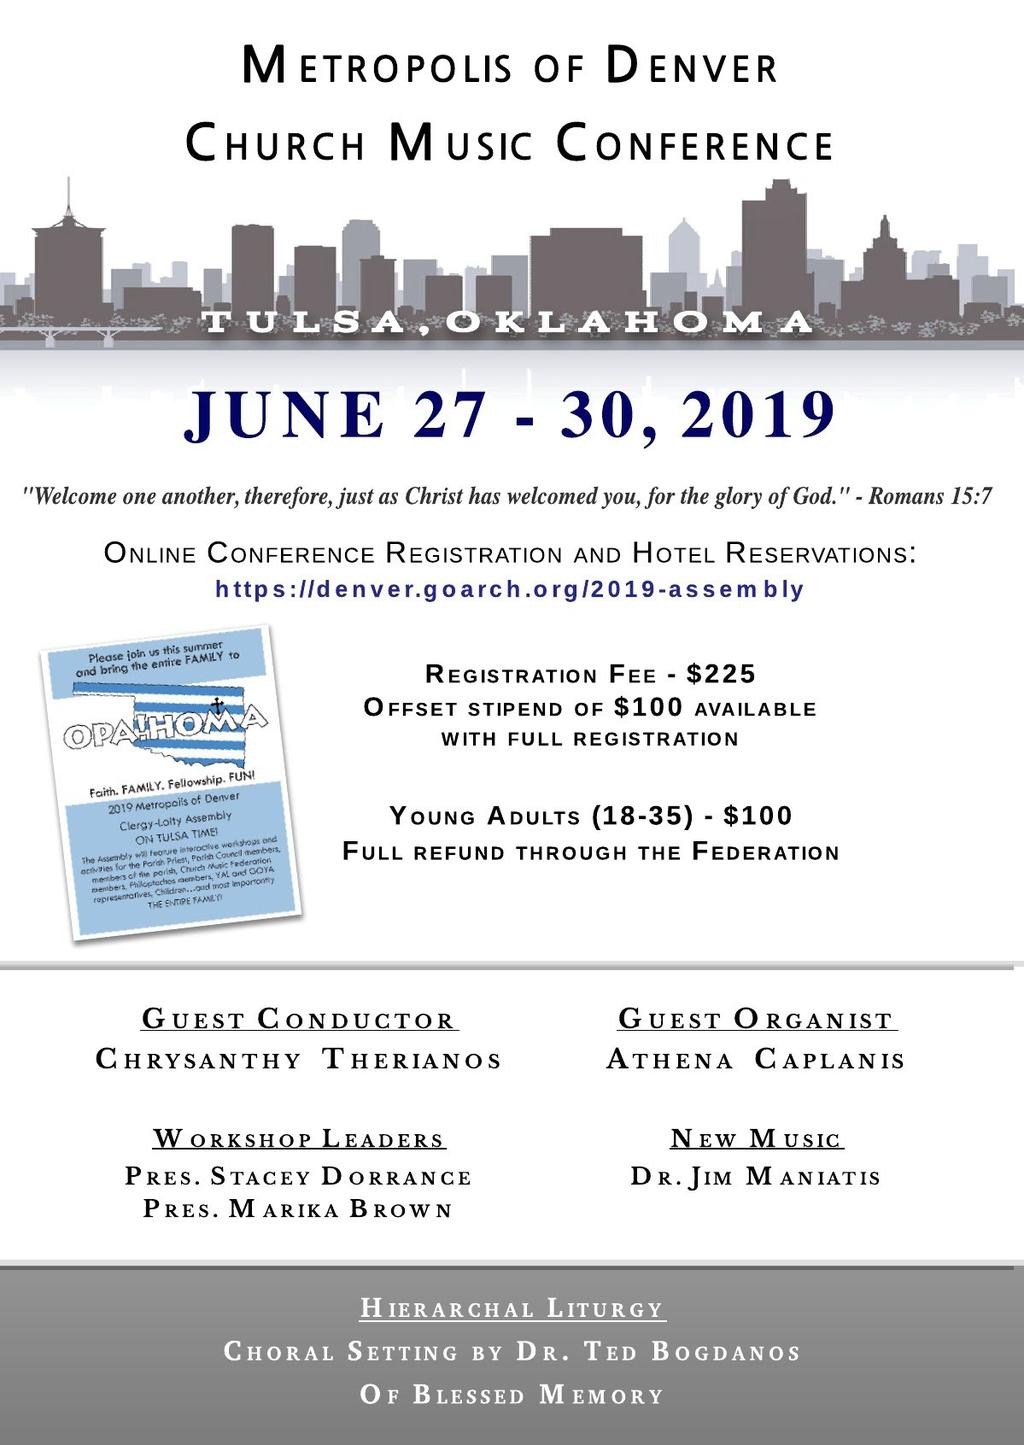 WEEKLY ANNOUNCEMENTS: June 16, 2019 The YAL Conference will be held in sunny southern California at the Hyatt Regency Long Beach, 200 S. Pine Avenue, Long Beach, CA.